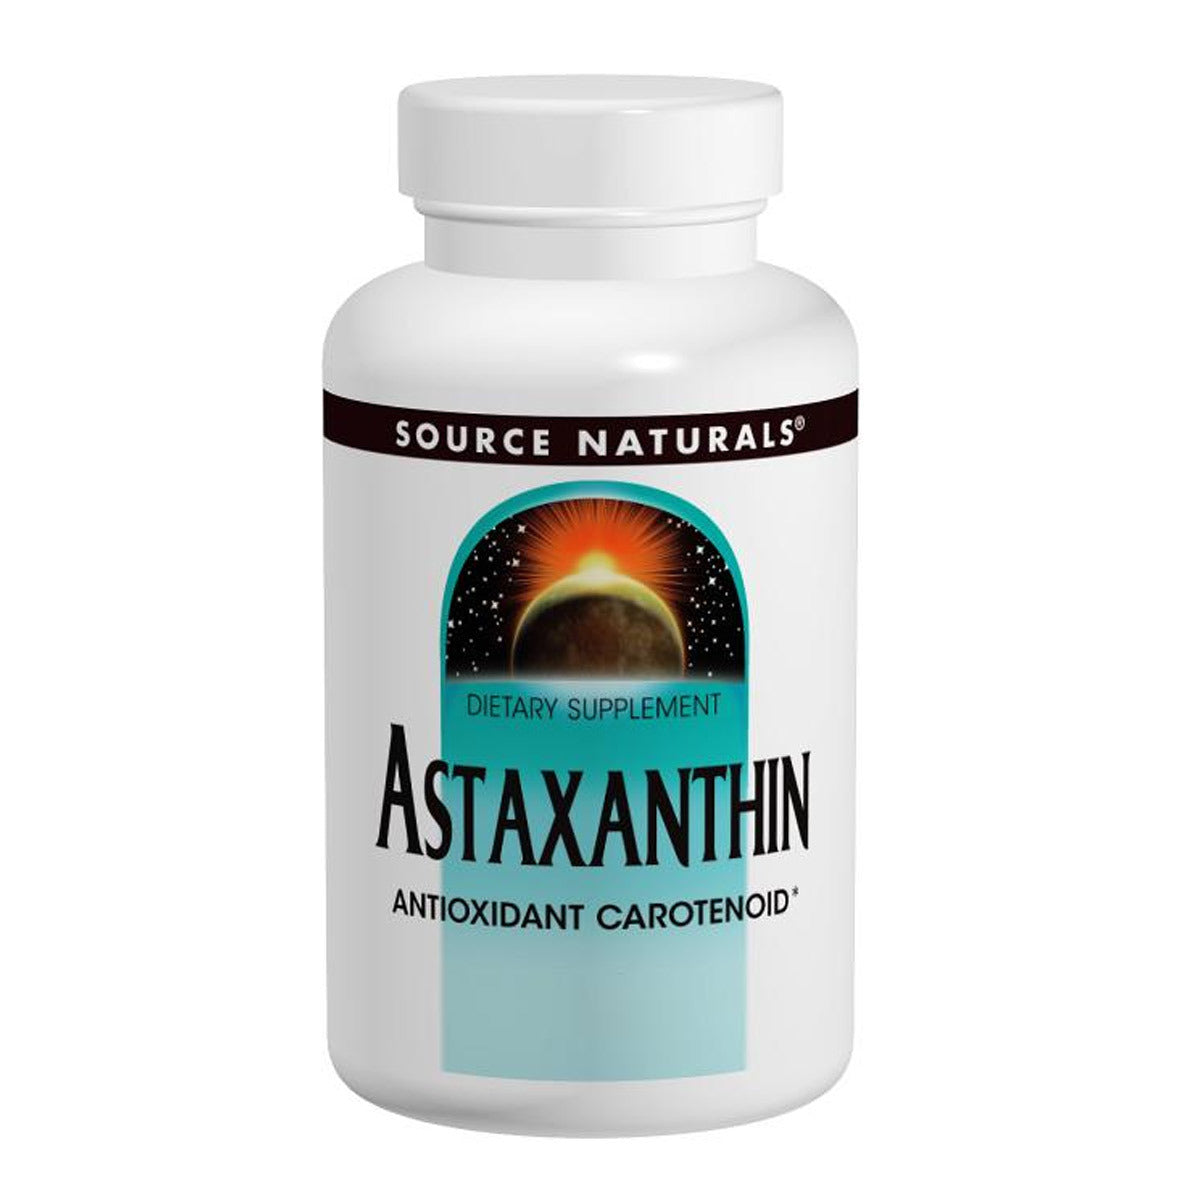 Primary image of Astaxanthin 2mg